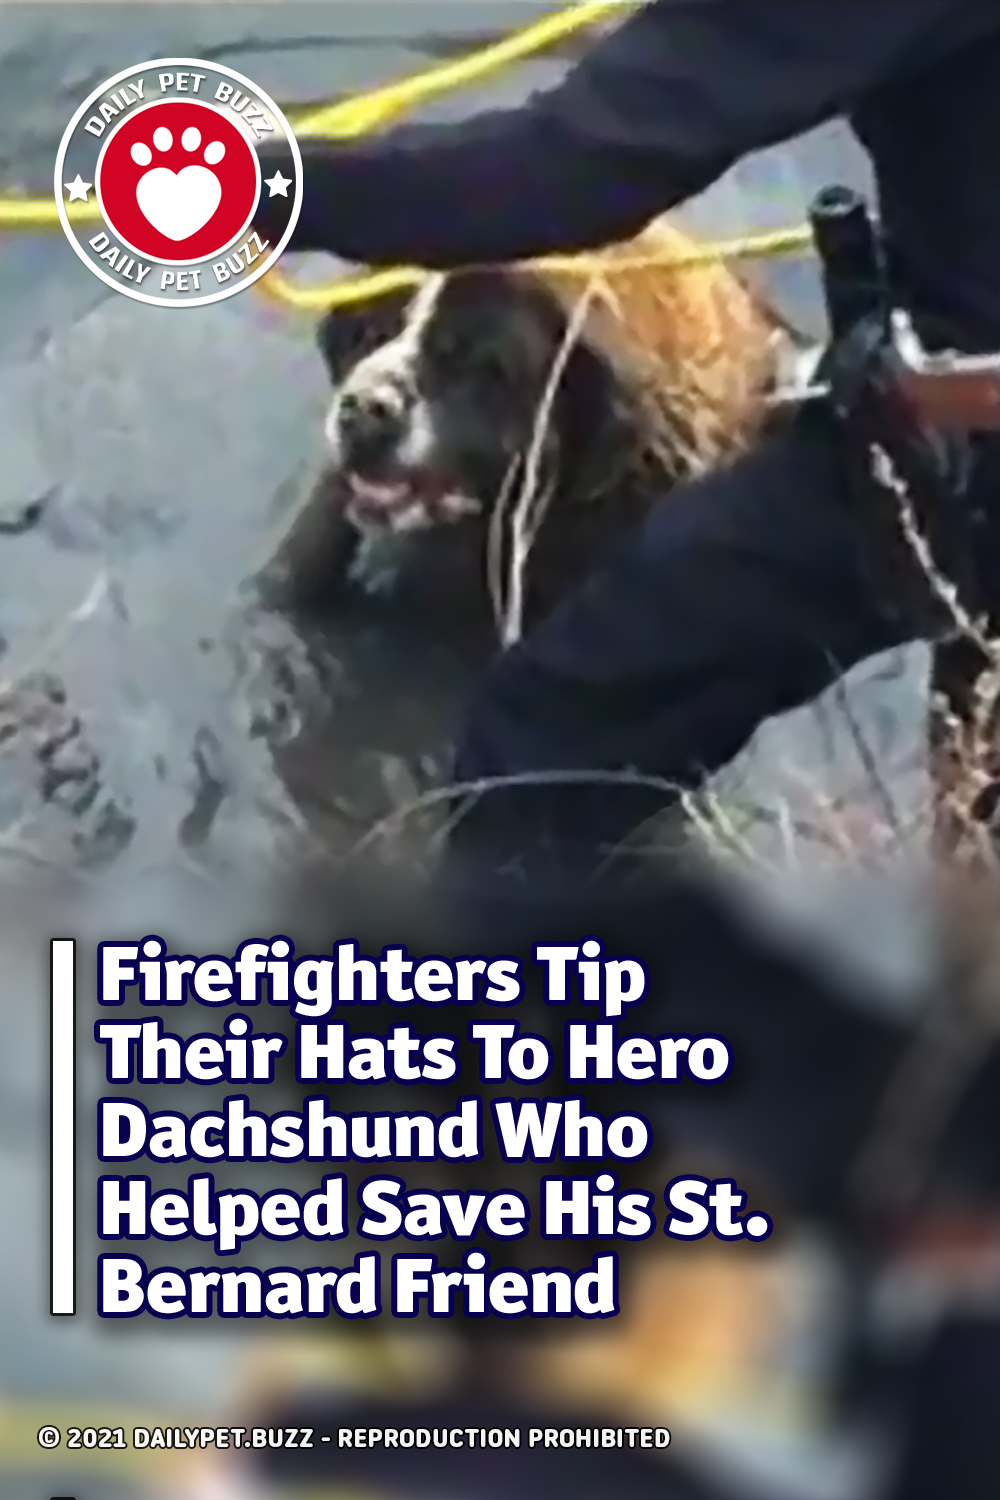 Firefighters Tip Their Hats To Hero Dachshund Who Helped Save His St. Bernard Friend